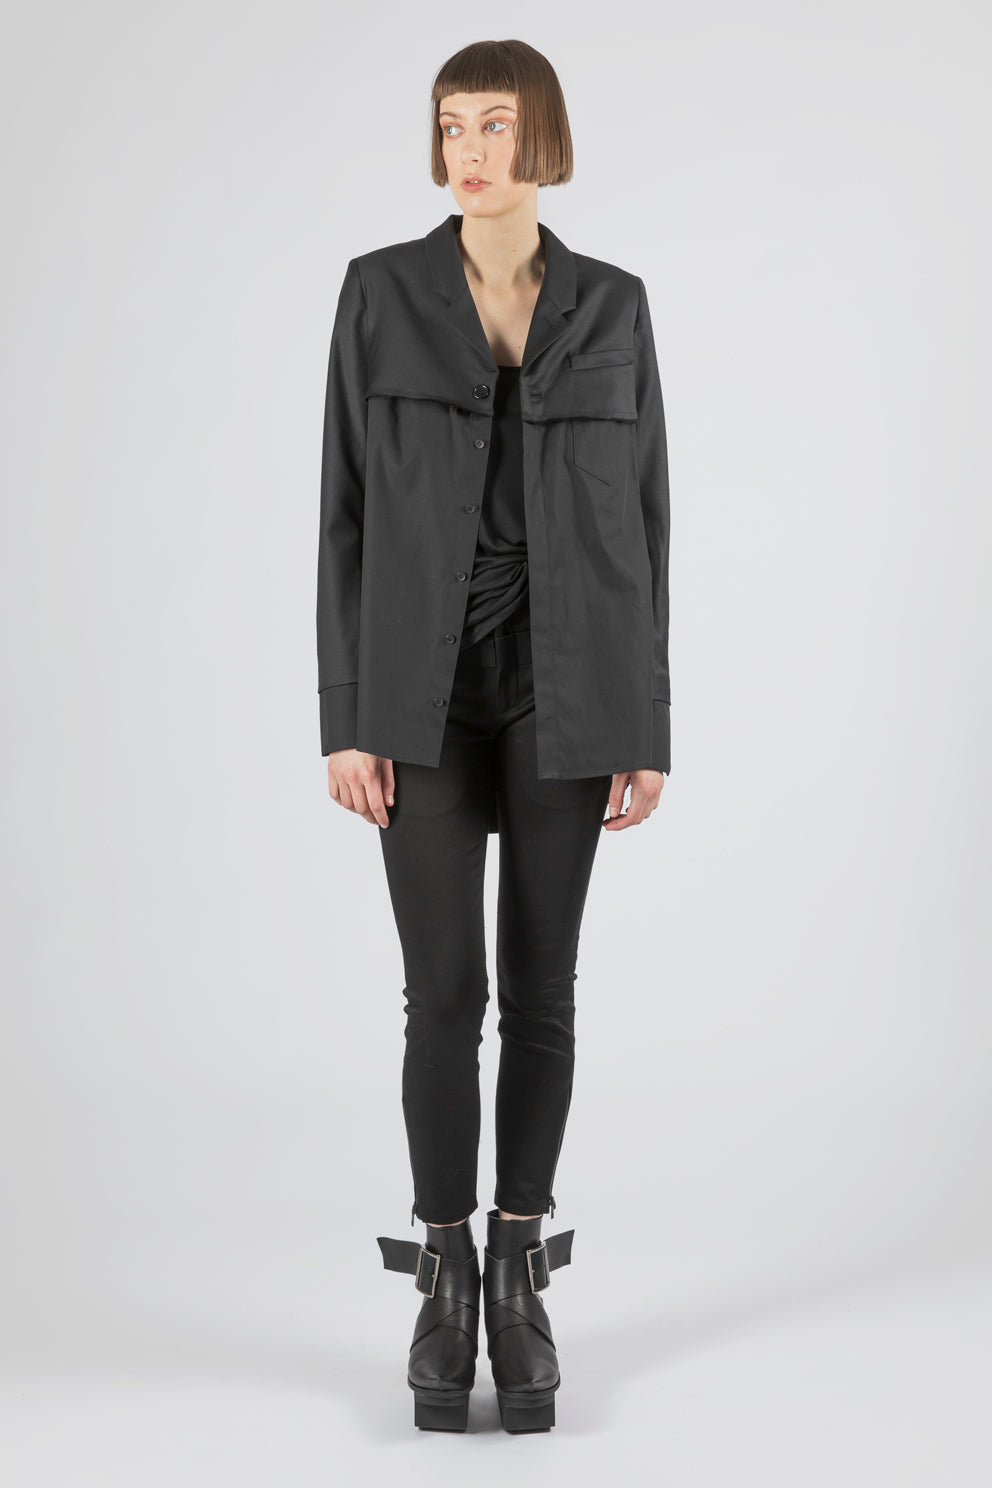 CUTTED - Jacket